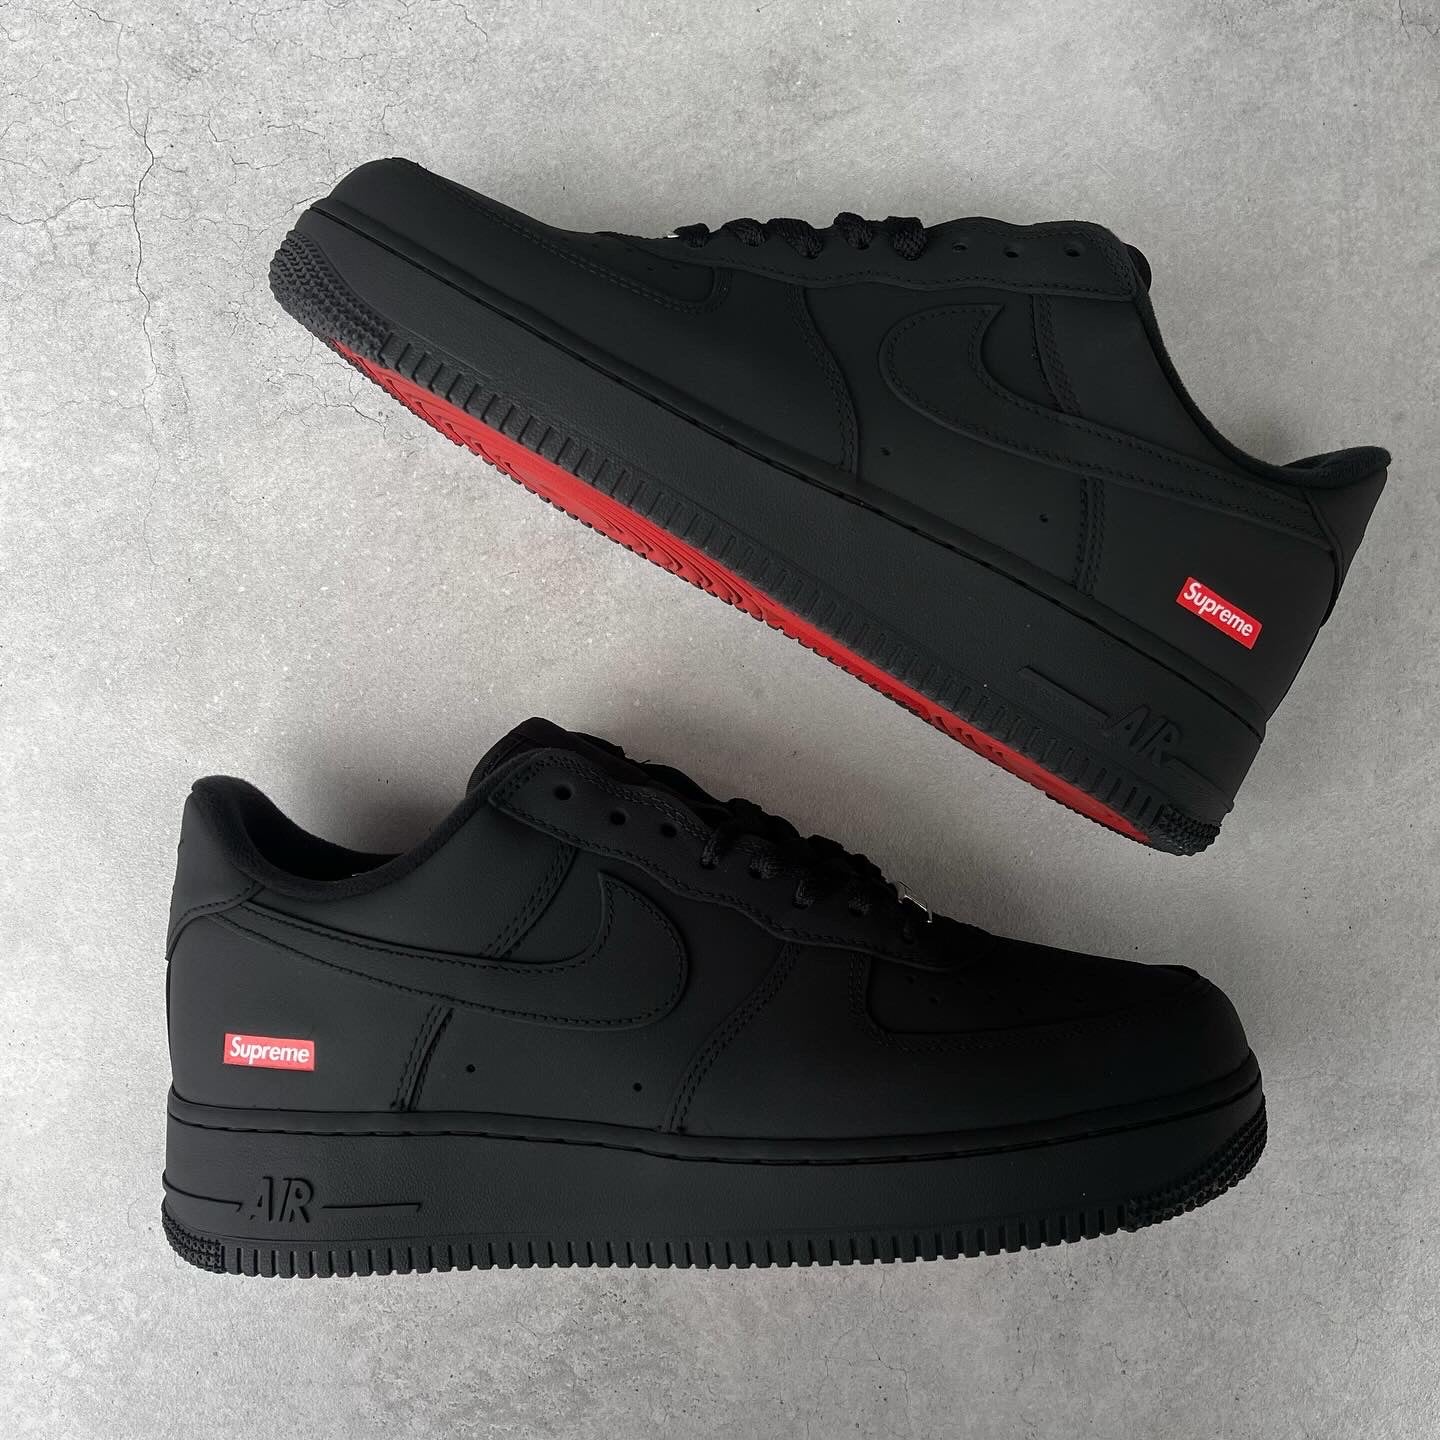 Custom AIR FORCE 1 Supreme - Mattest (with red soles)